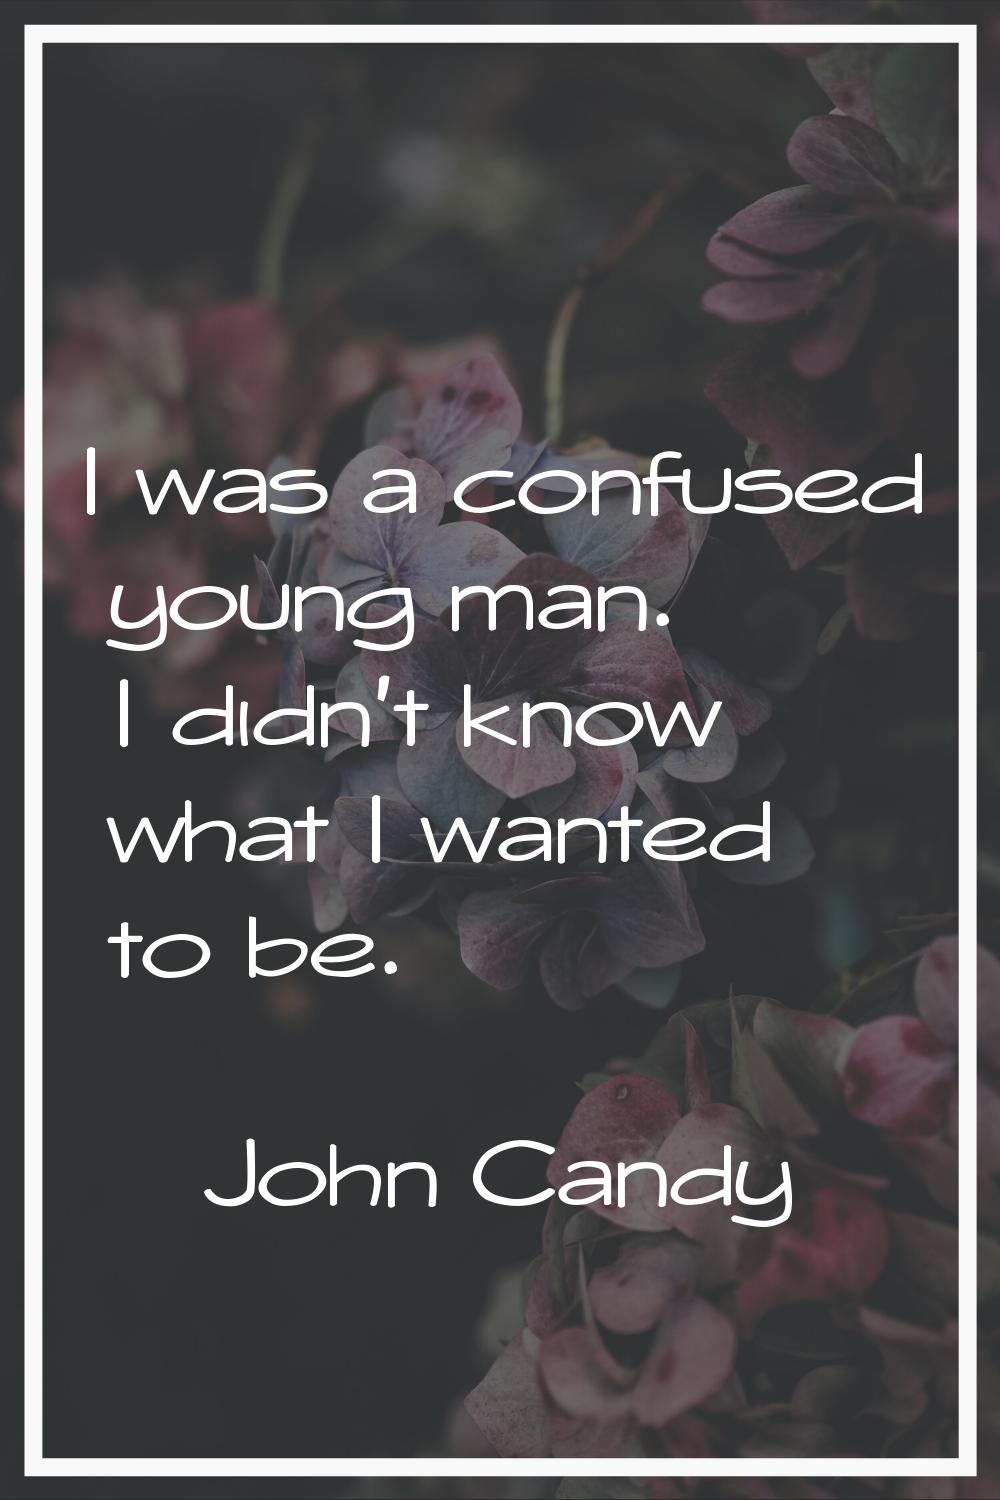 I was a confused young man. I didn't know what I wanted to be.